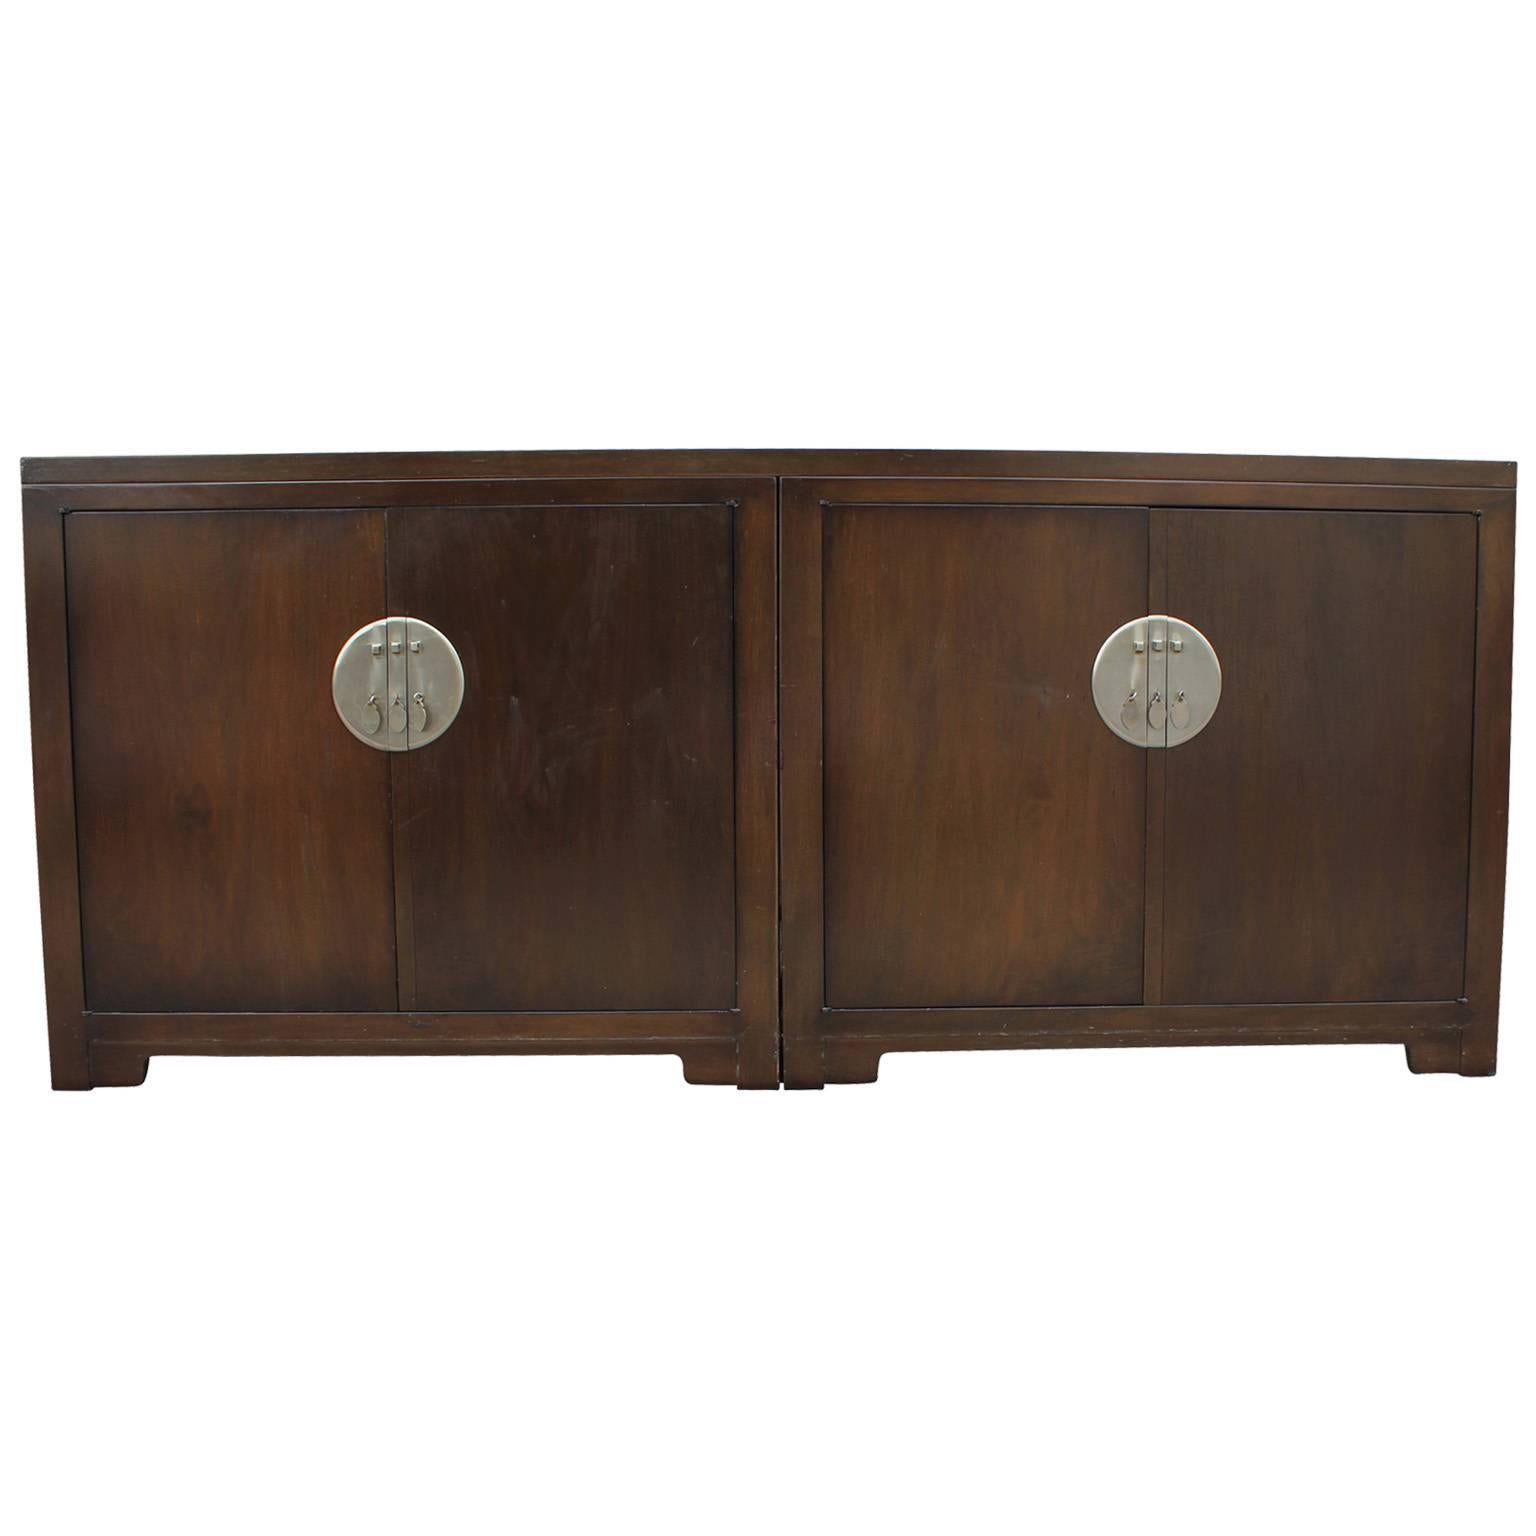 Excellent modular sideboard or pair of cabinets by Baker for the Far East Collection. Cabinets are joined by a removable table top. Cabinets are accented with large, Asian inspired nickel escutcheons. One cabinet features three drawers and the other